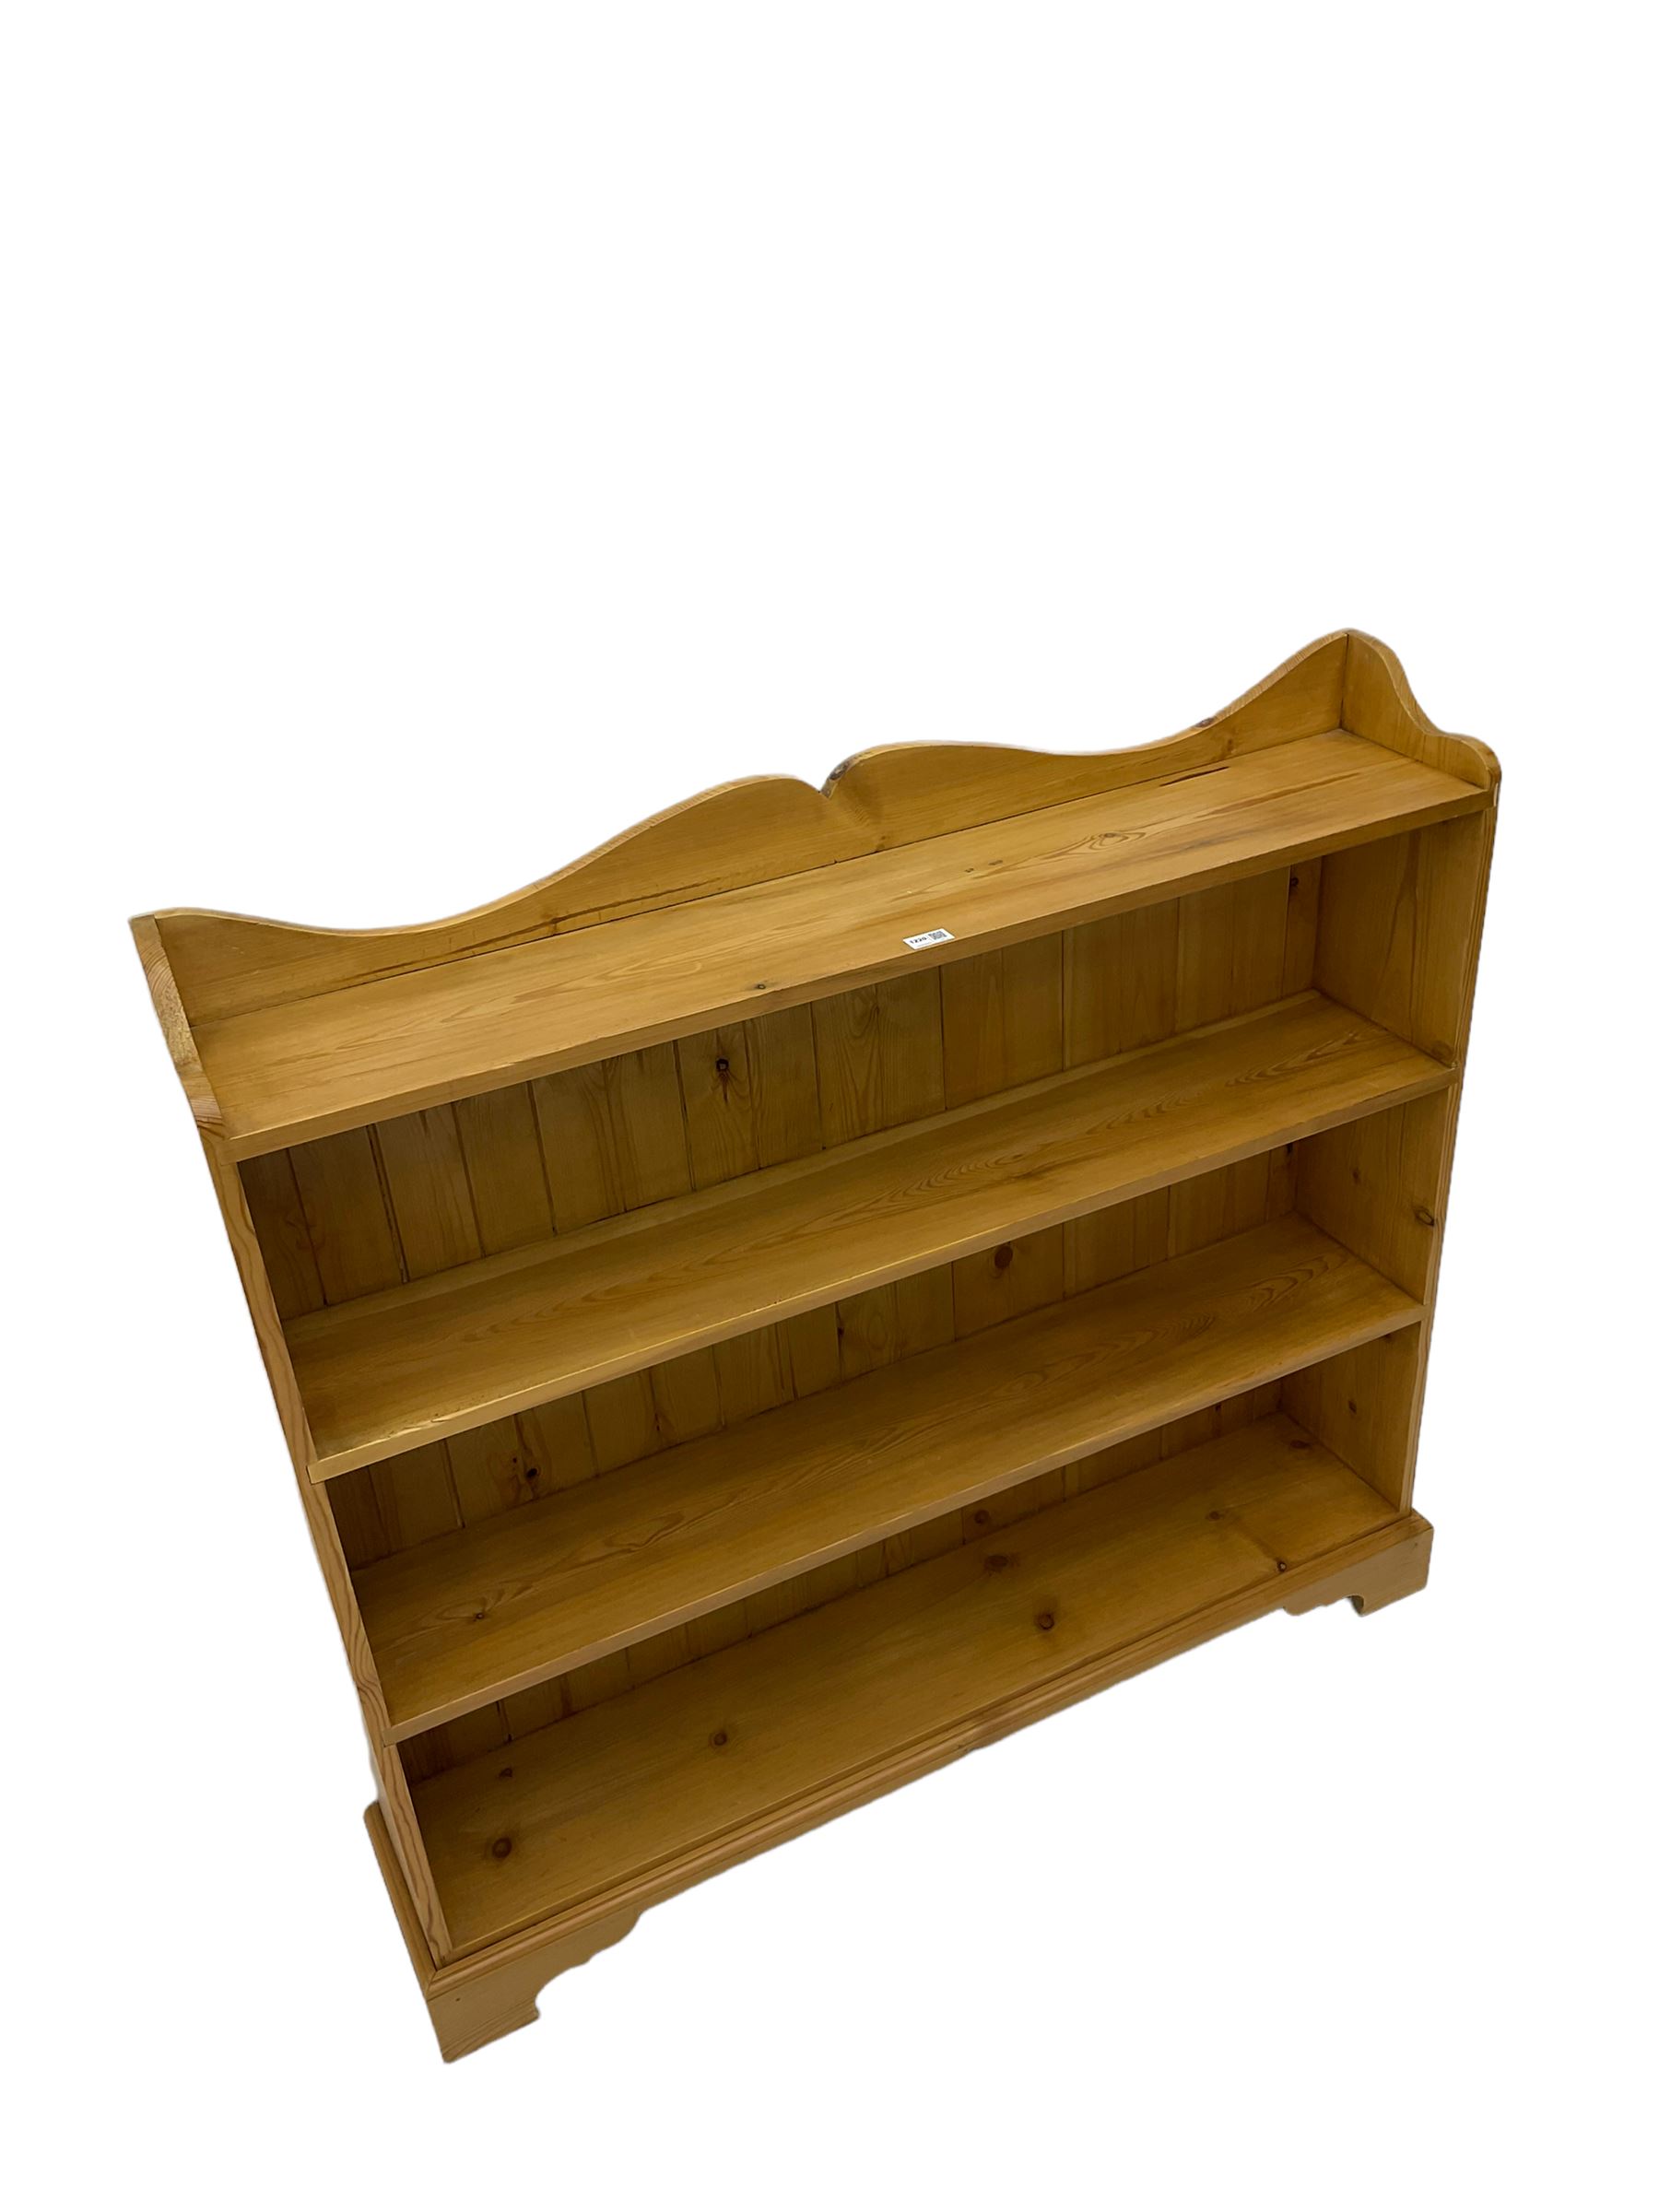 Waxed pine bookcase - Image 6 of 6